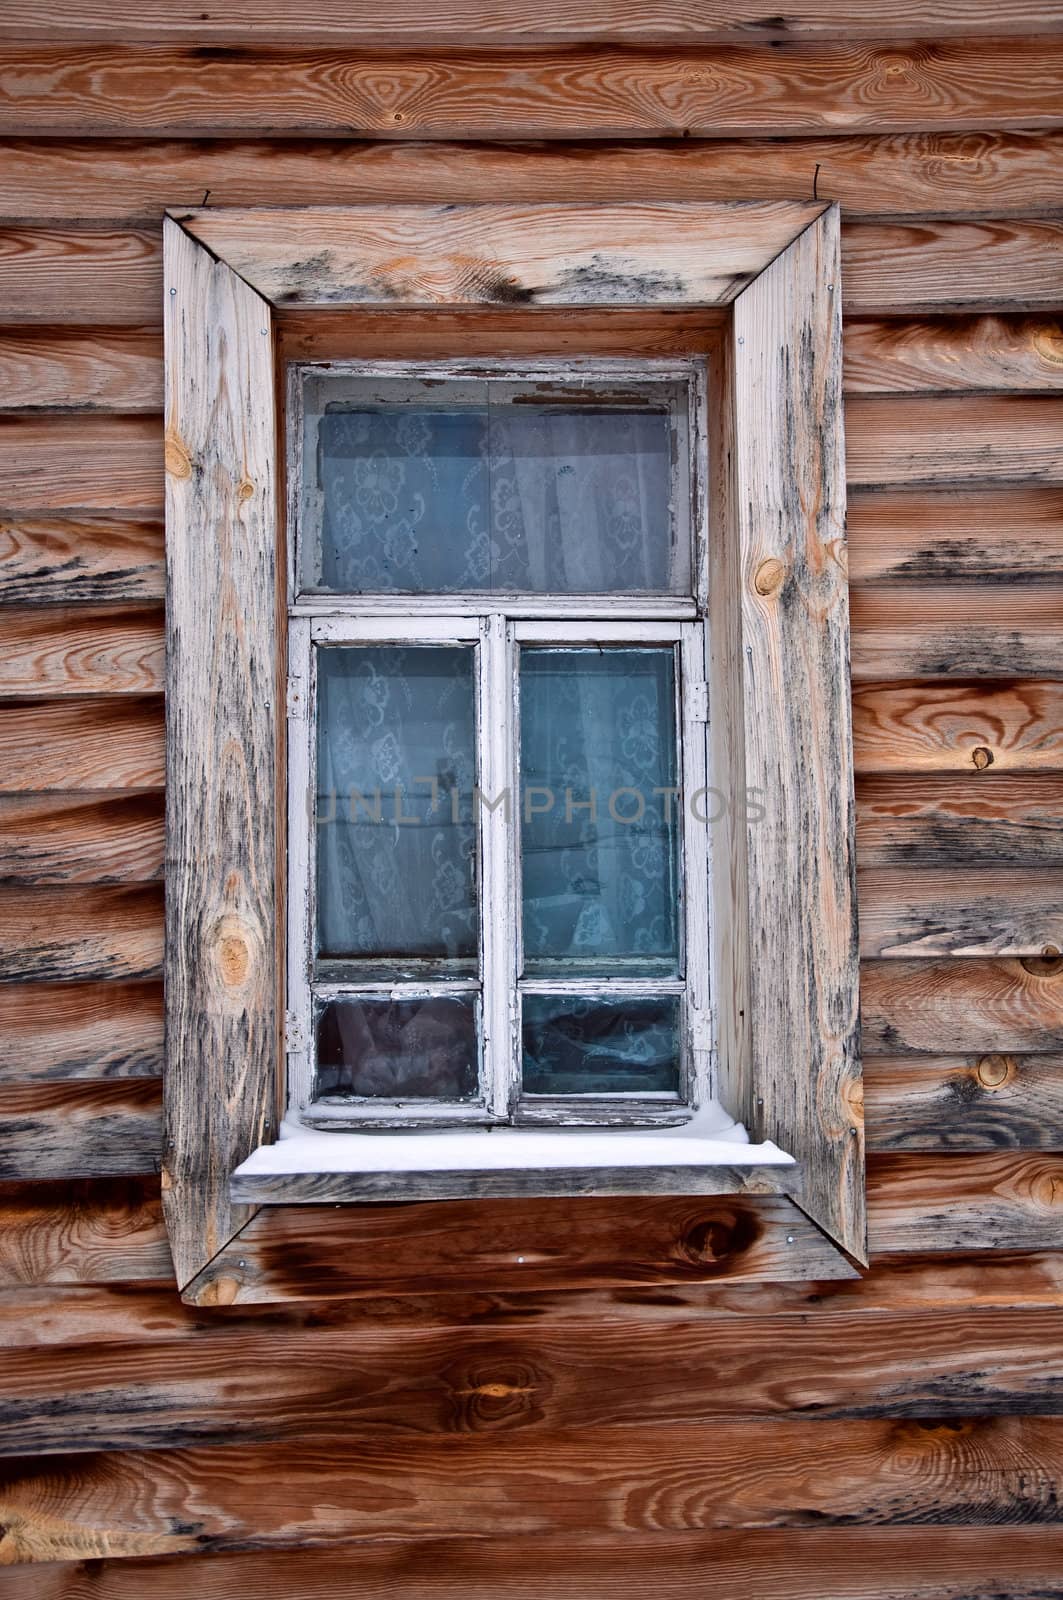 Old rustic wall with a window. Fragment, close-up. Rural life.